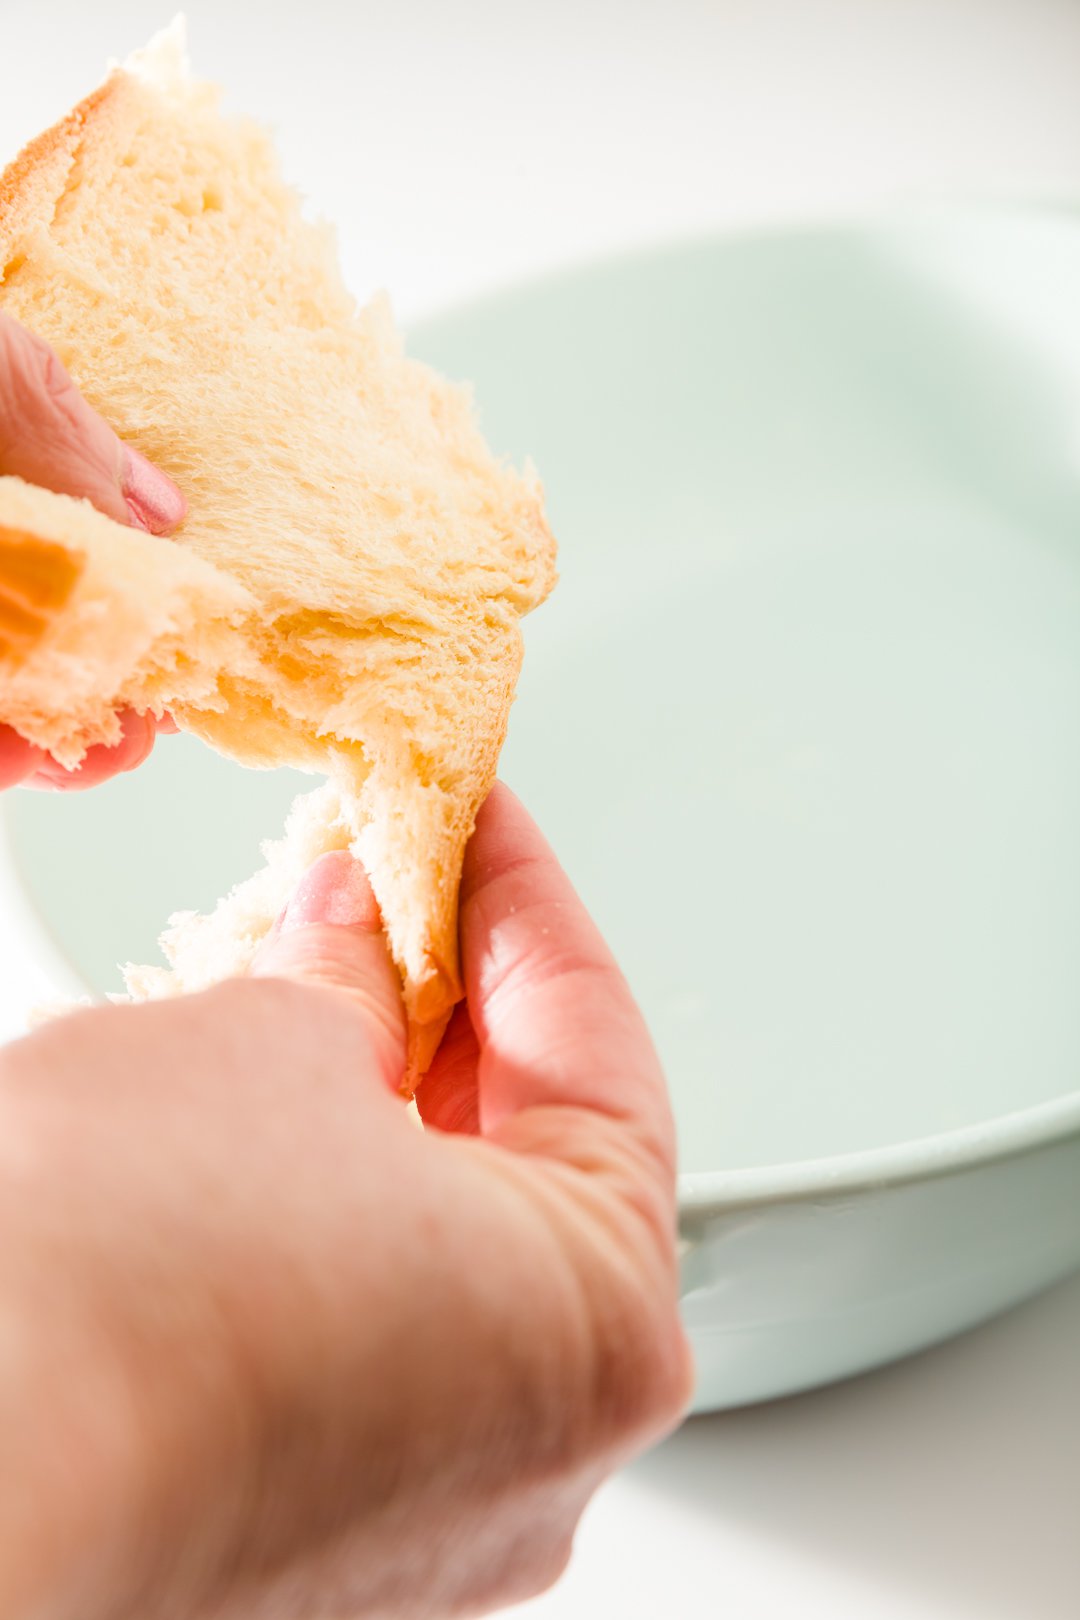 Piece of brioche being ripped over a casserole dish